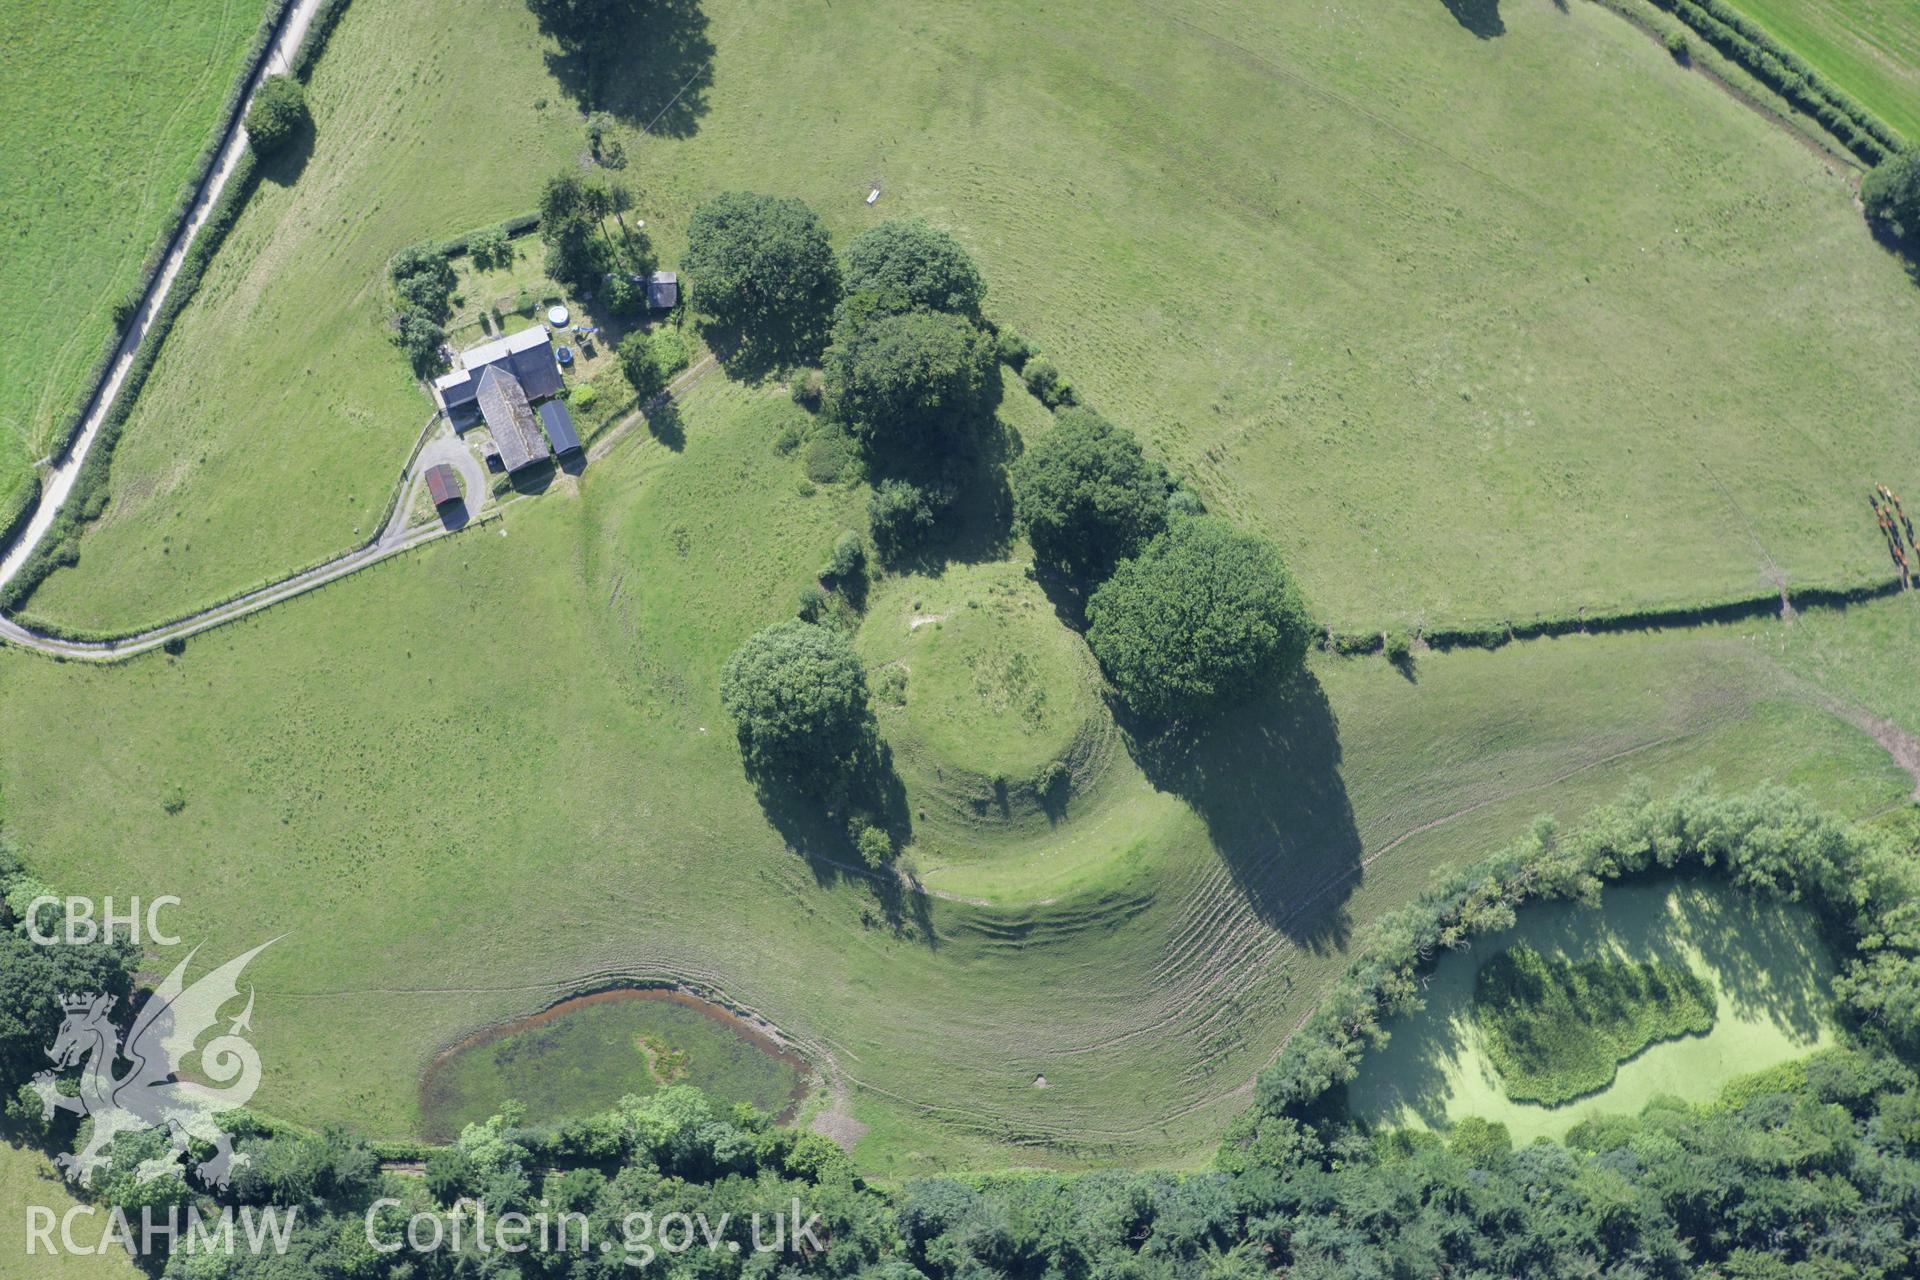 RCAHMW colour oblique aerial photograph of Sycharth Castle, Llansilin. Taken on 31 July 2007 by Toby Driver